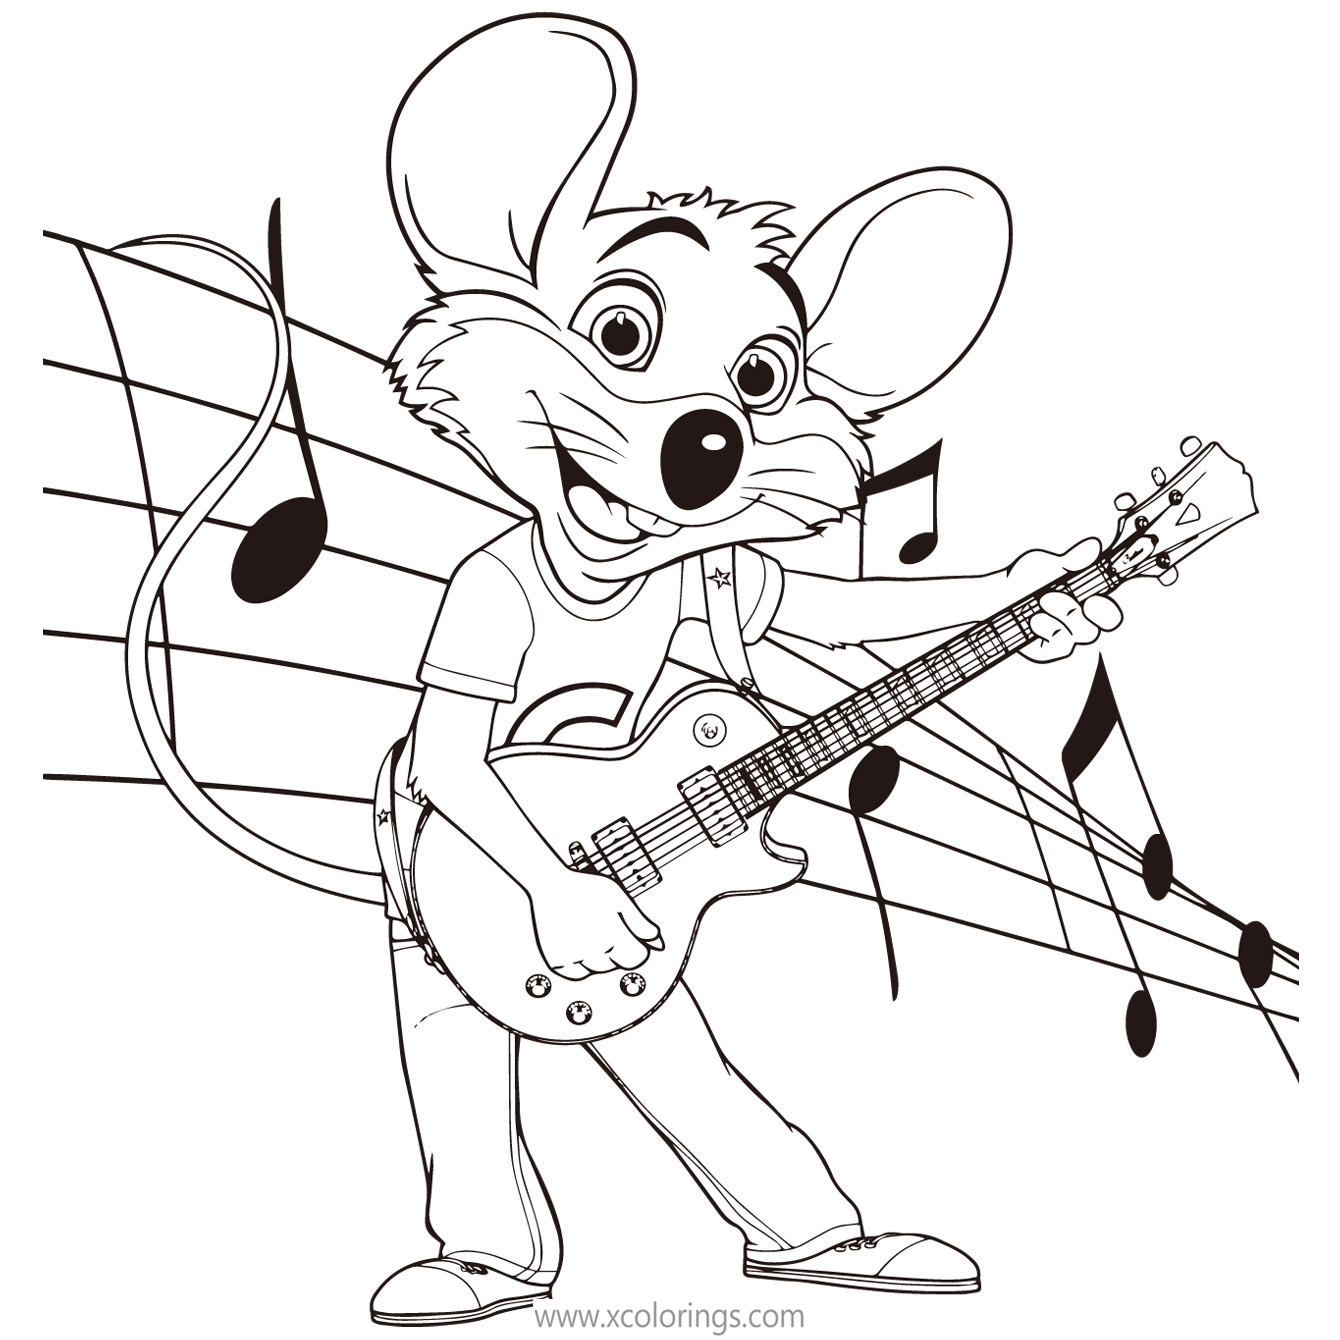 Free Chuck E Cheese Coloring Pages Rock Star printable